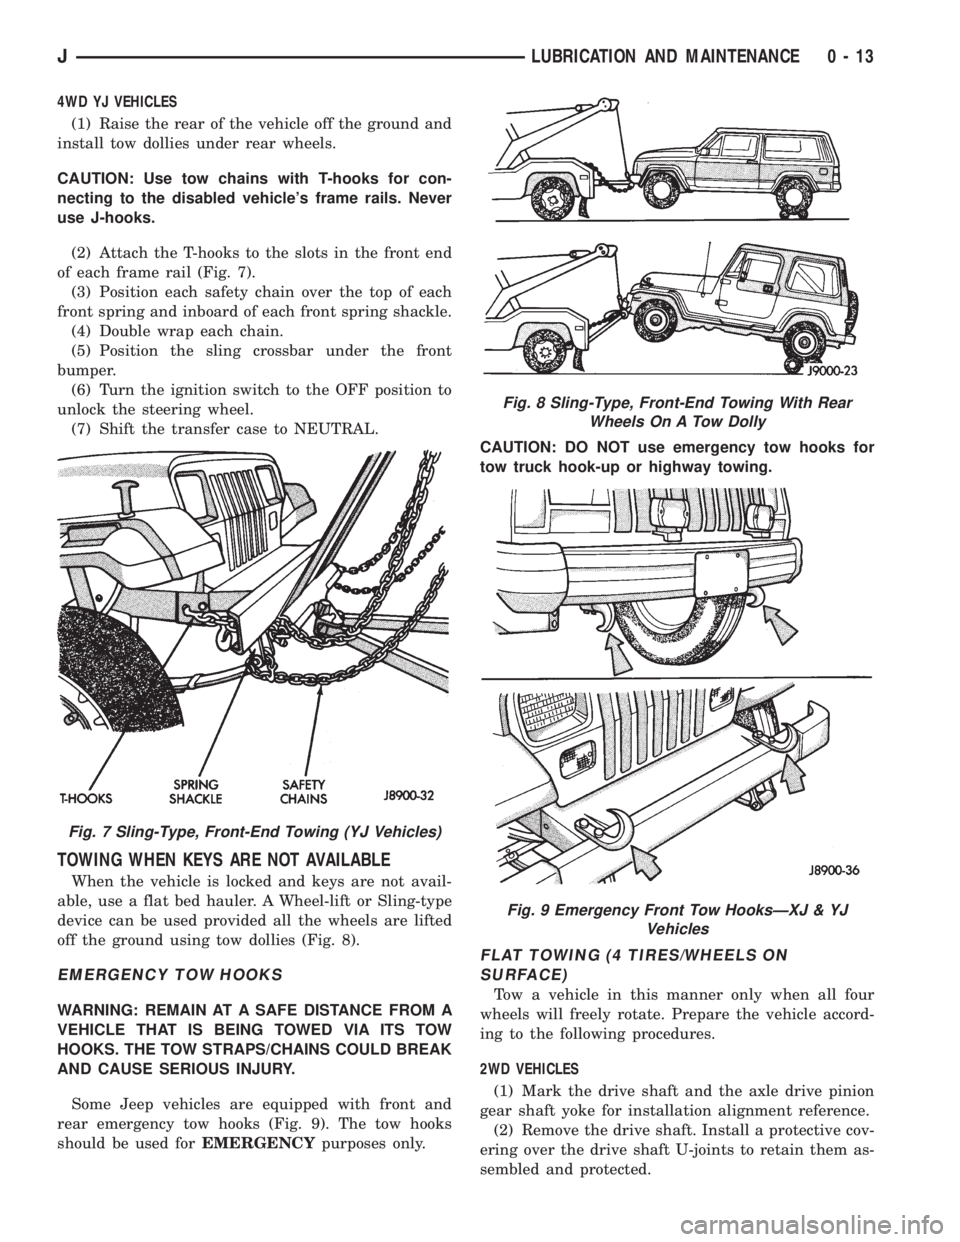 JEEP YJ 1995  Service And Repair Manual 4WD YJ VEHICLES
(1) Raise the rear of the vehicle off the ground and
install tow dollies under rear wheels.
CAUTION: Use tow chains with T-hooks for con-
necting to the disabled vehicles frame rails.